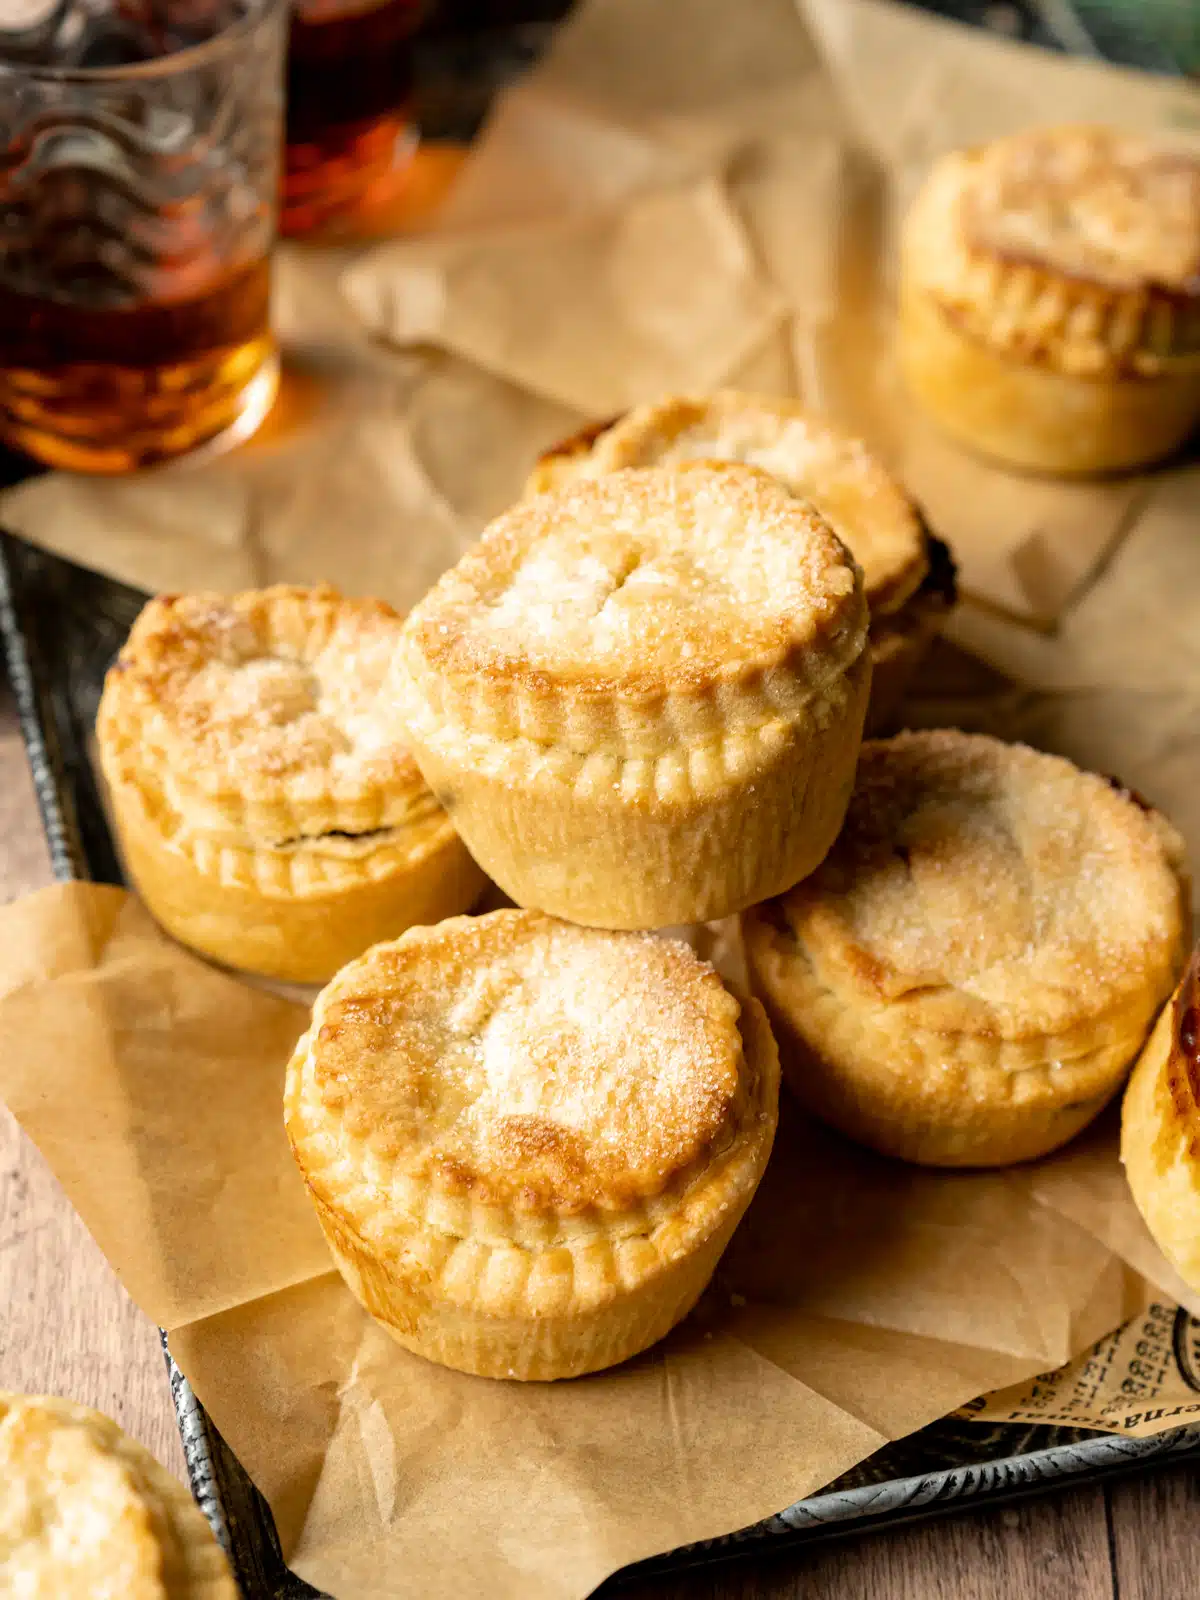 mince pies on a tray with a sheet of paper and 2 glasses of brandy in the background.